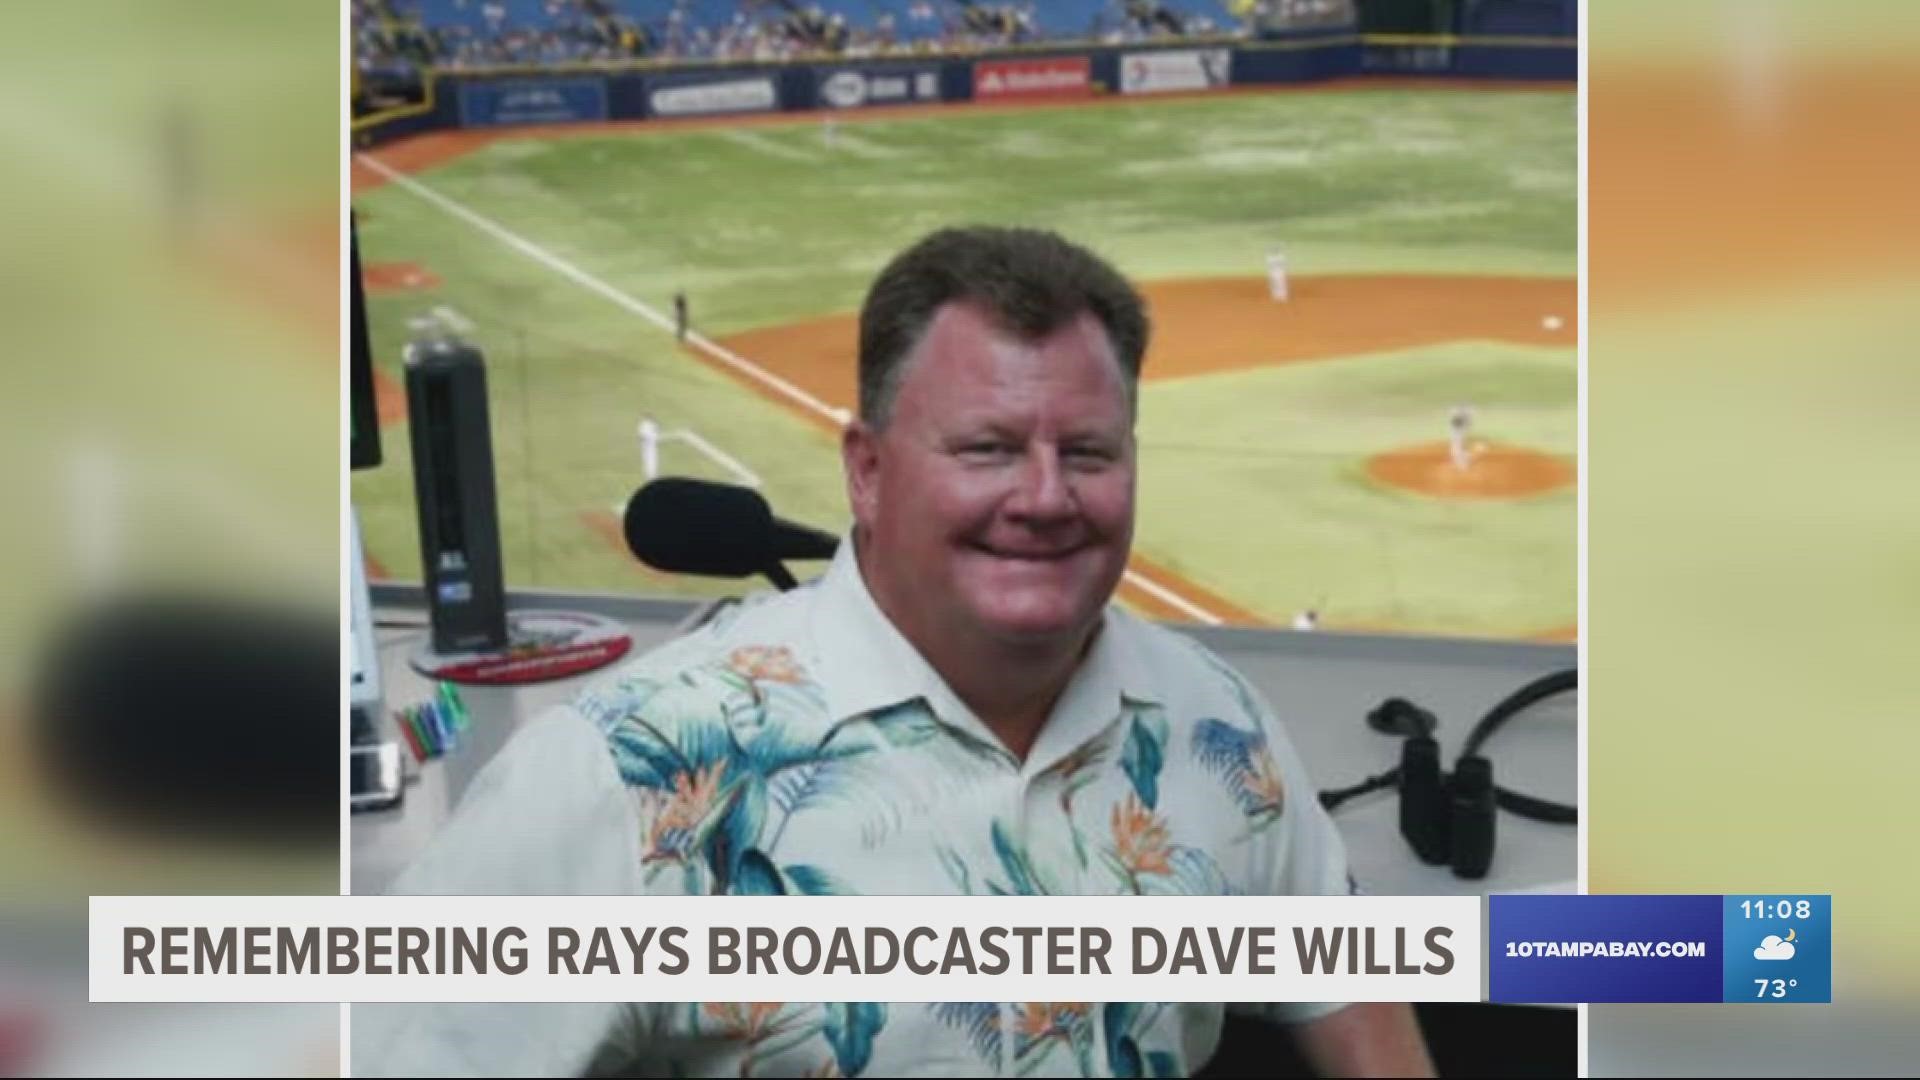 The Rays said there will be no radio broadcast in Sunday's spring training game against the Orioles in honor of Dave Wills.